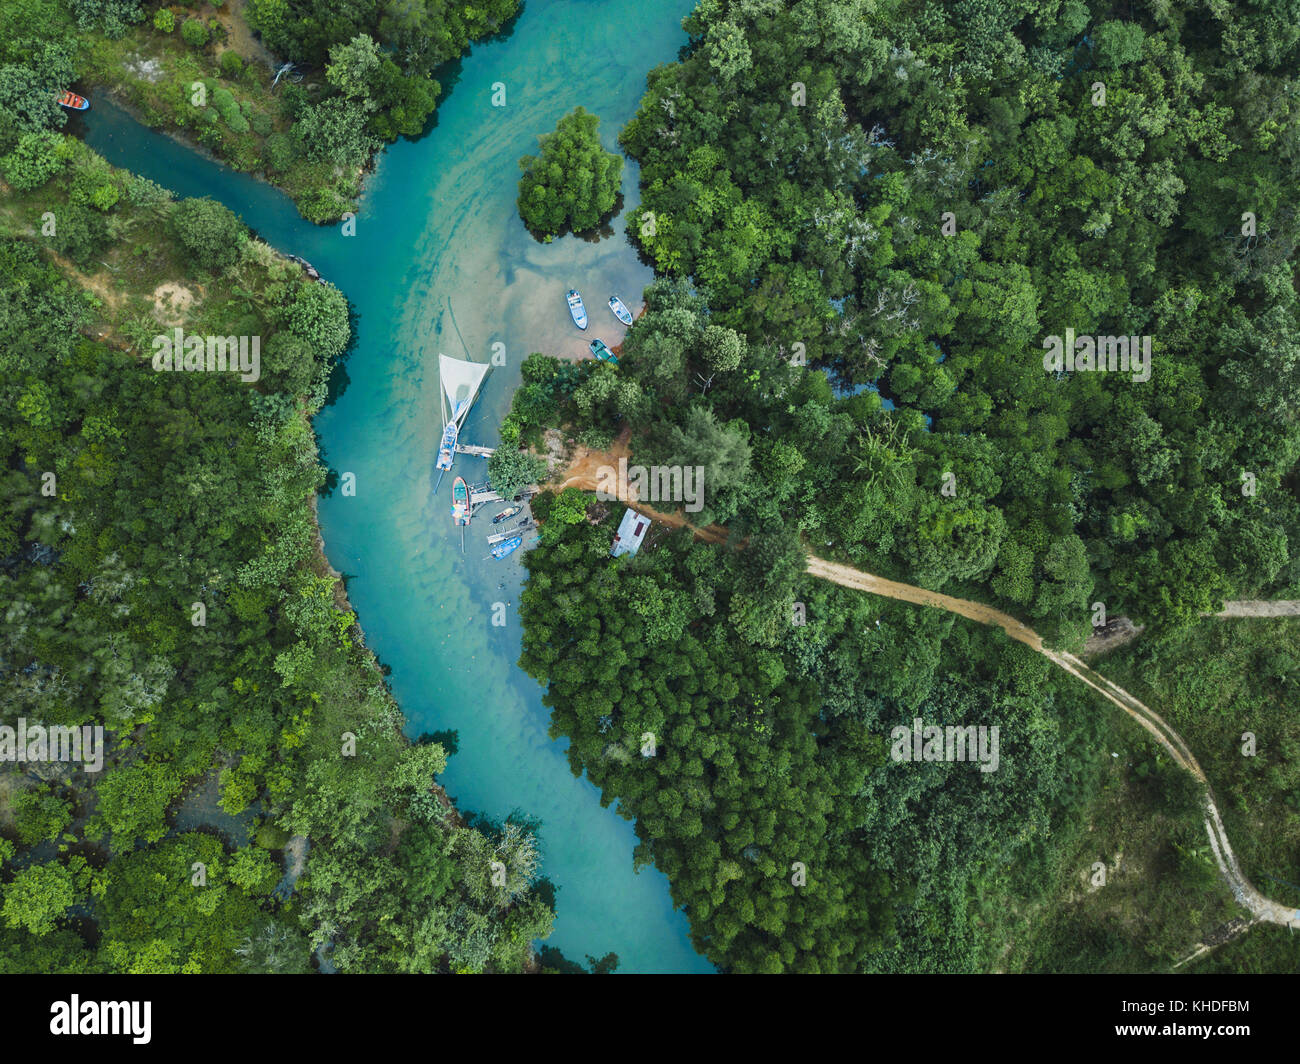 Thailand aerial landscape, drone view of river in green tropical forest, beautiful nature scenery of jungle wilderness Stock Photo